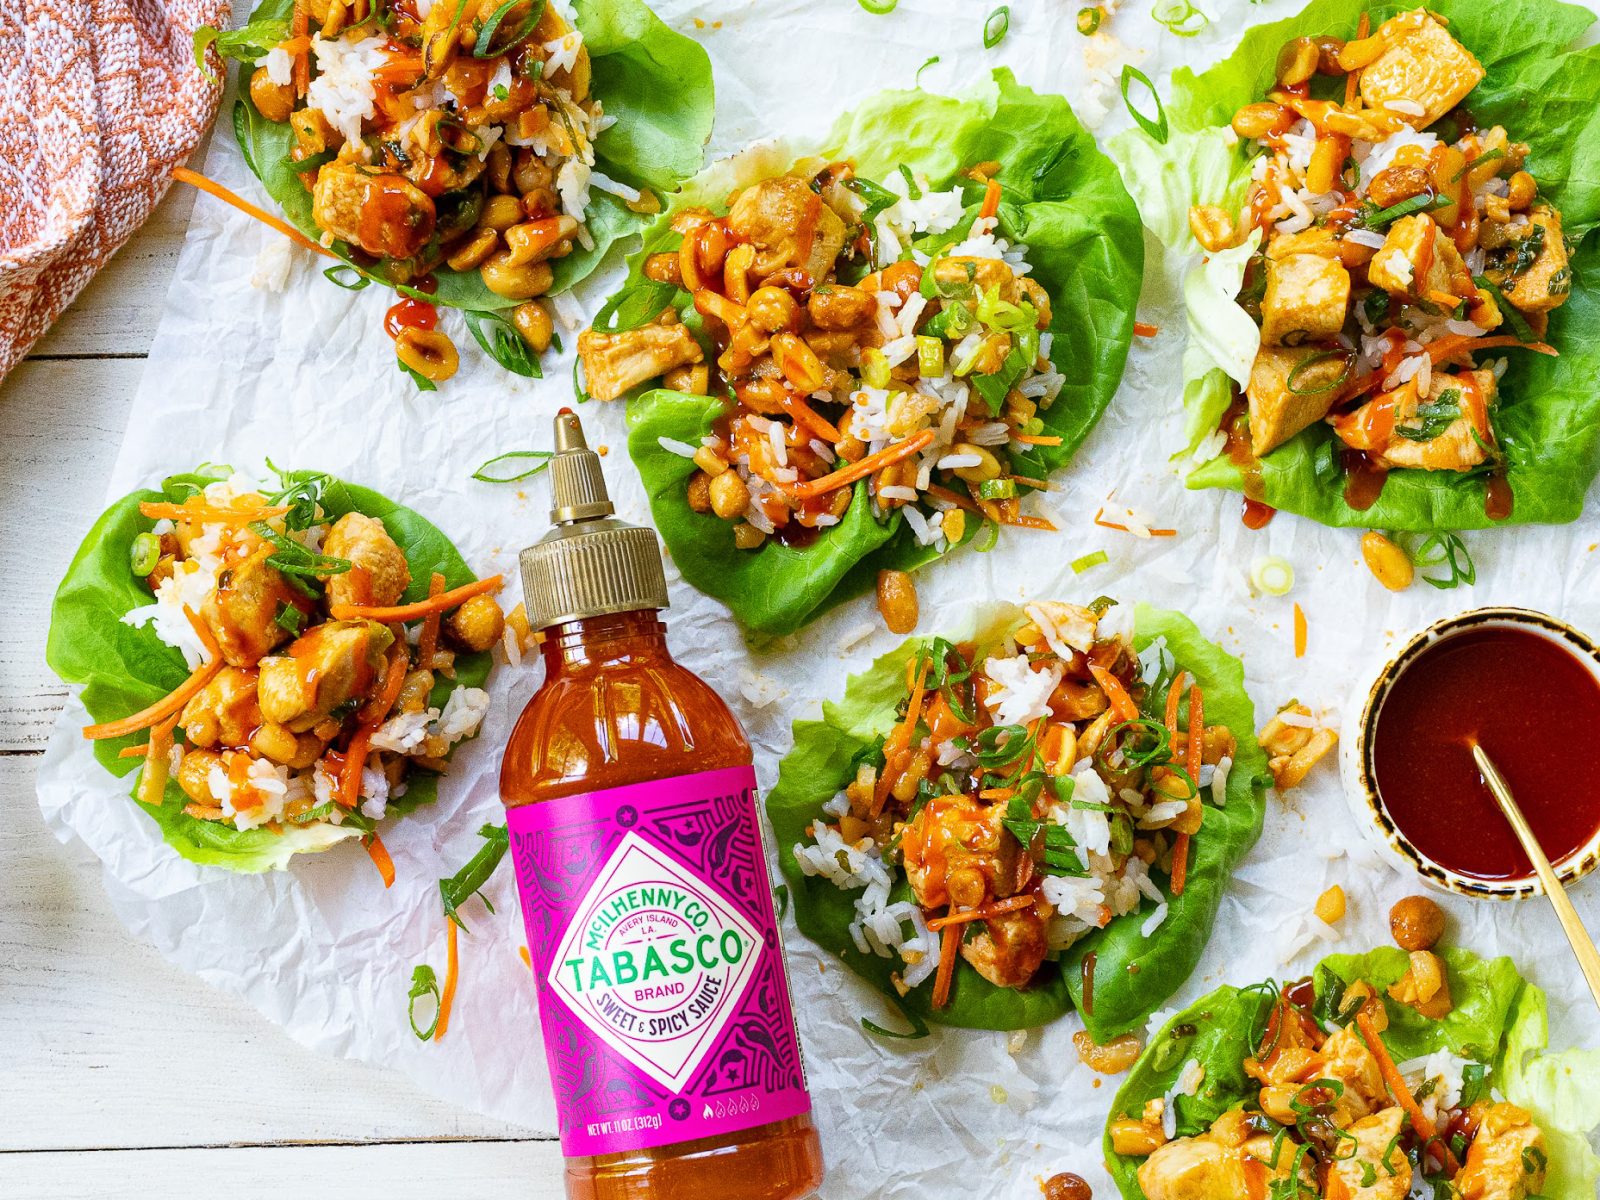 Stock Up On TABASCO® Brand Pepper Sauces During The BOGO Sale At Publix